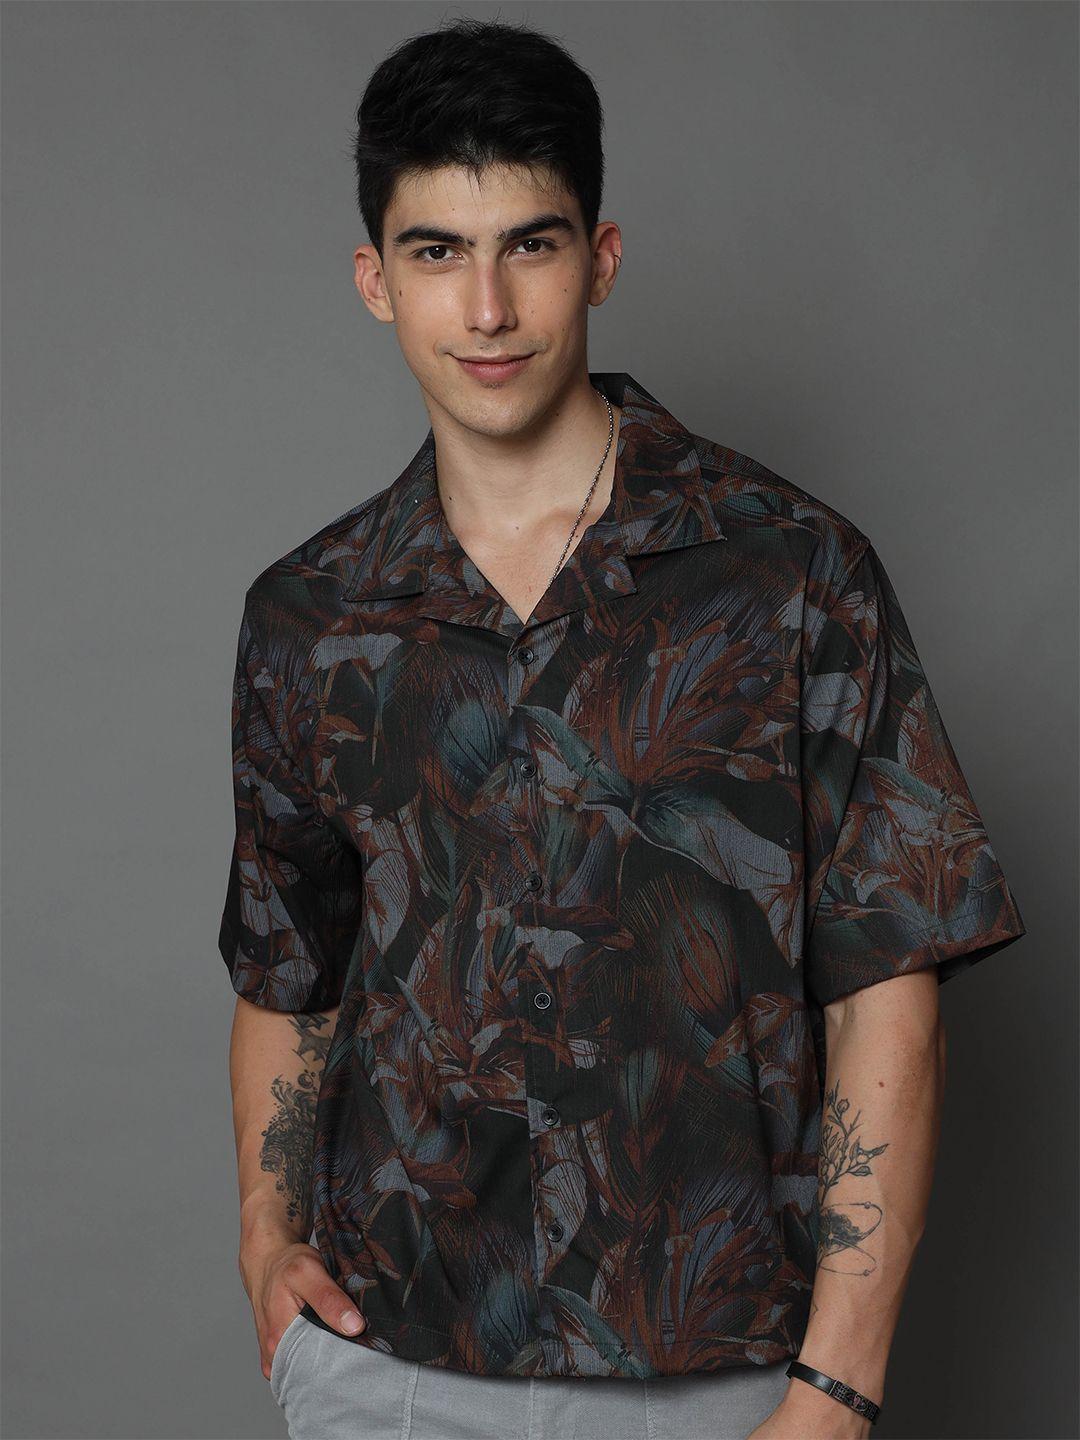 skewdeck private limited men comfort opaque printed casual shirt